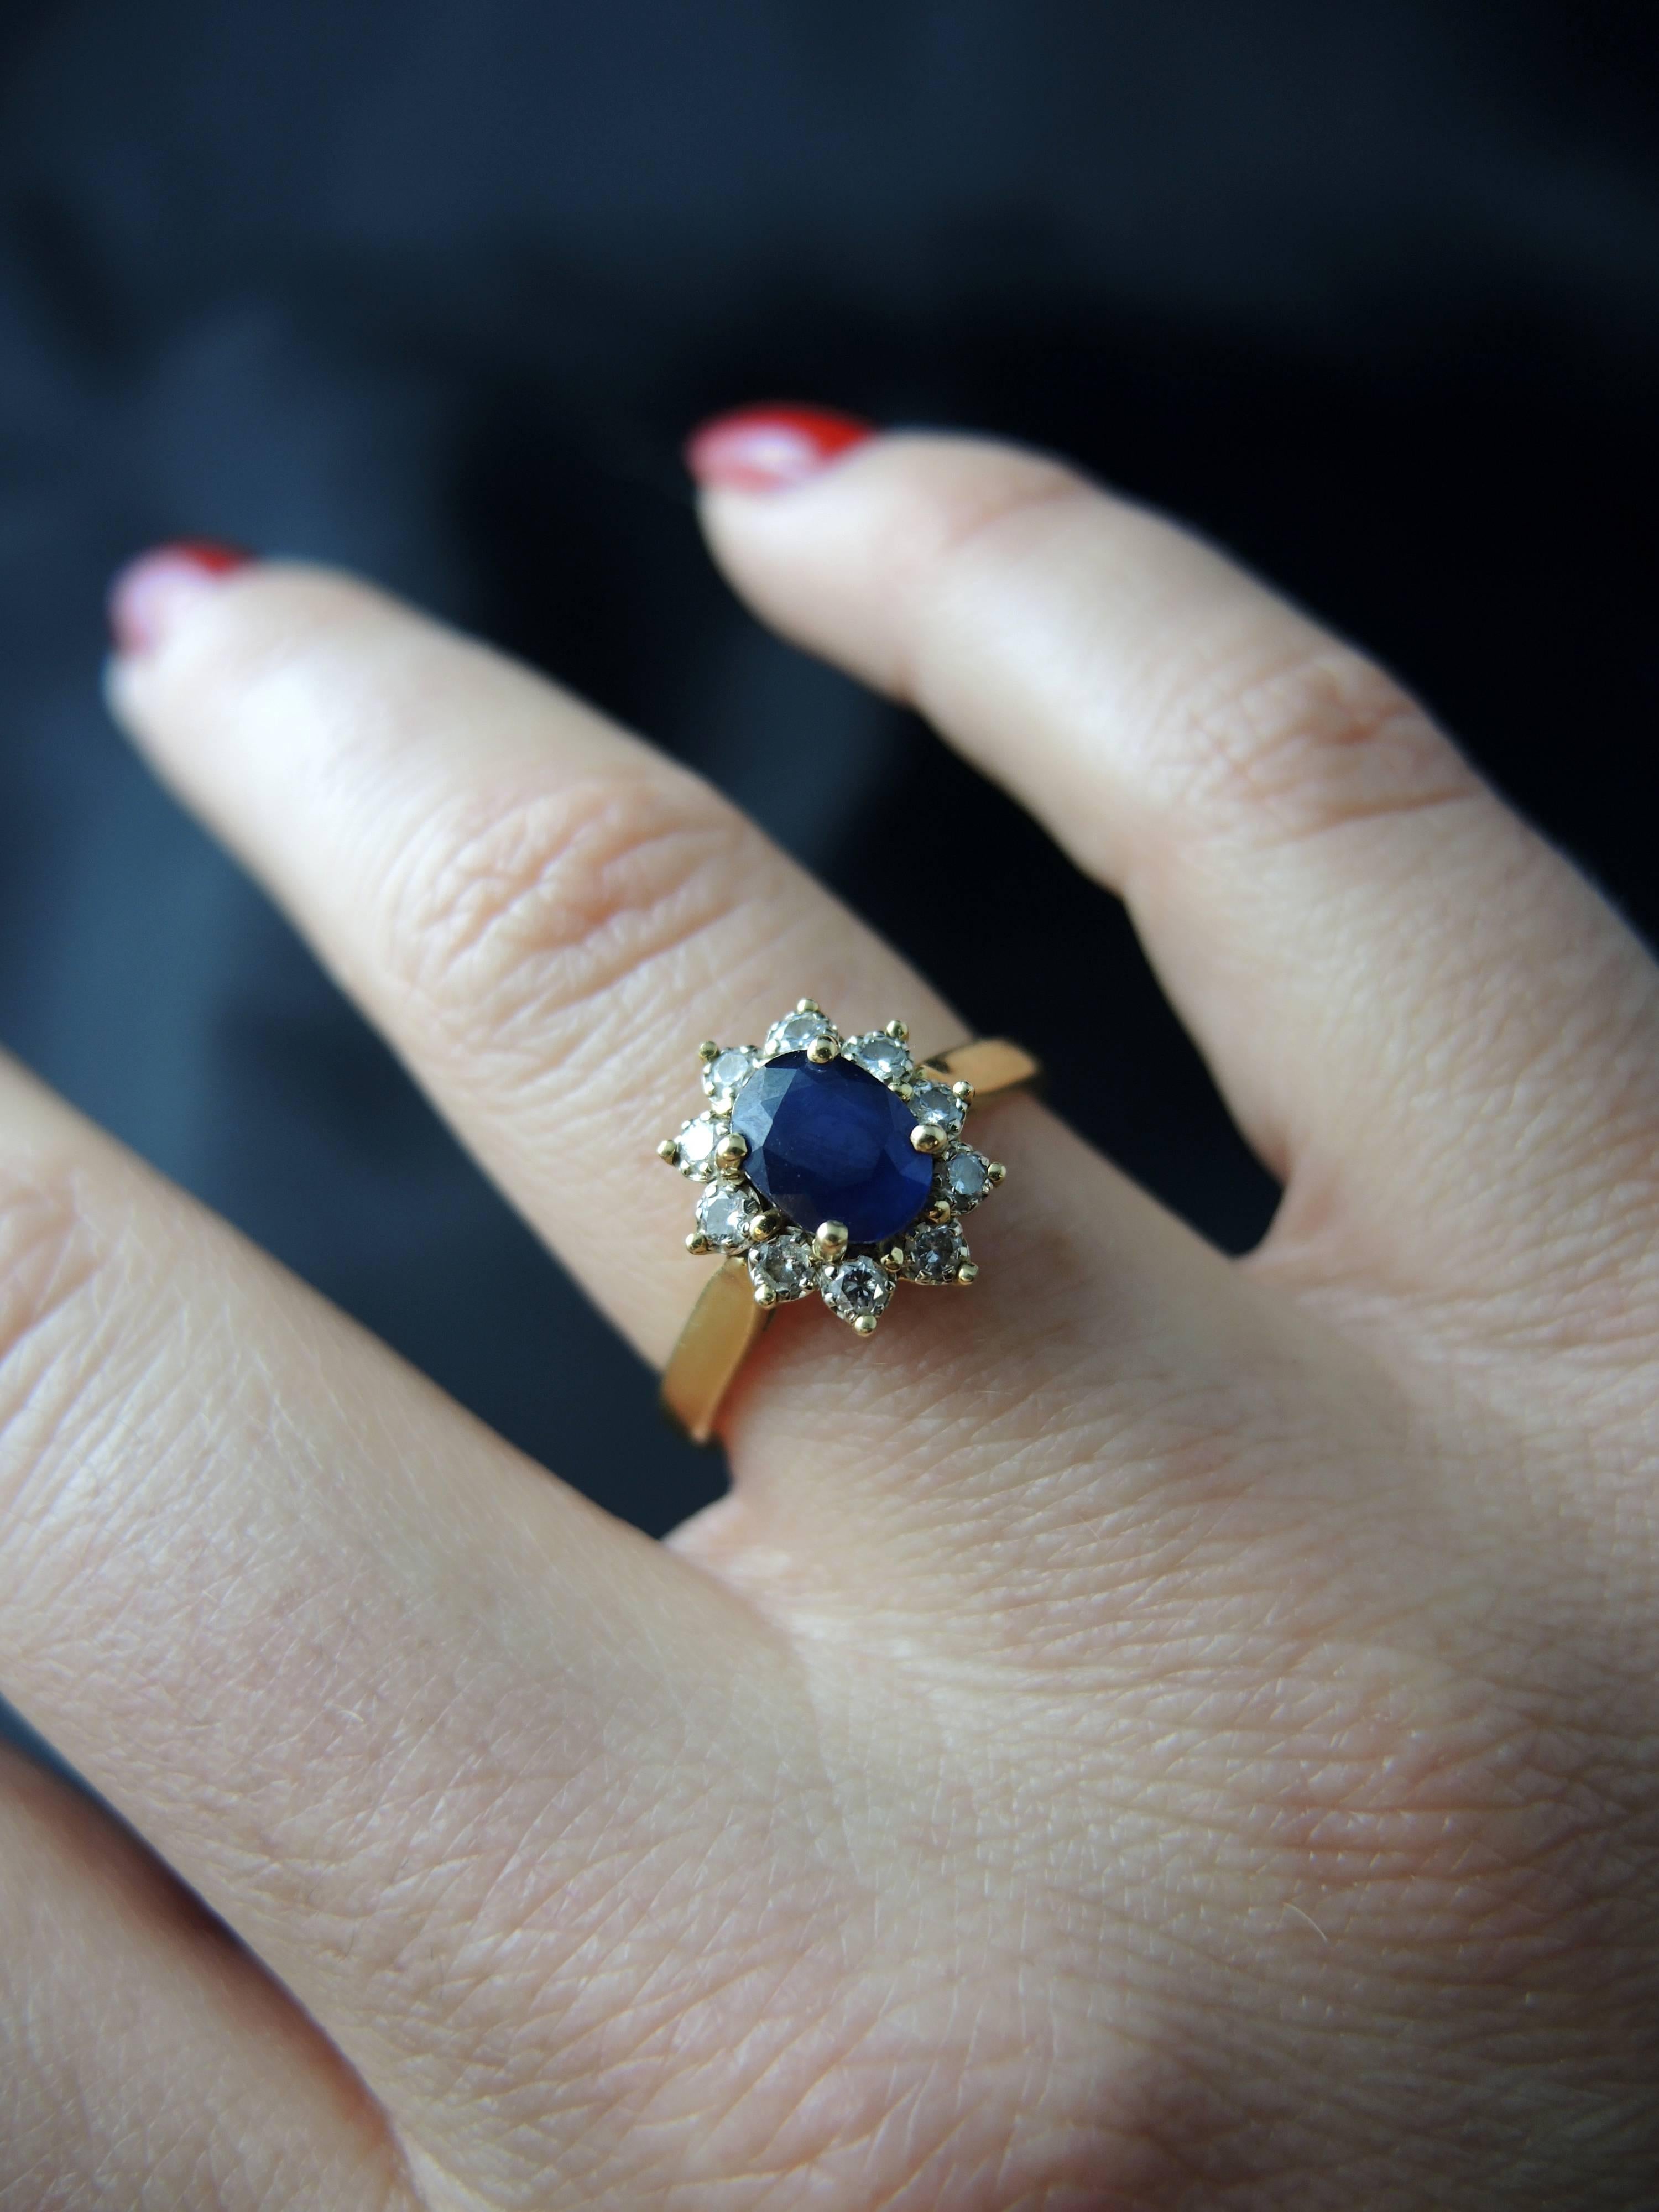 French Vintage Gold Cluster Ring with a Sapphire Surrounded by Diamonds 1